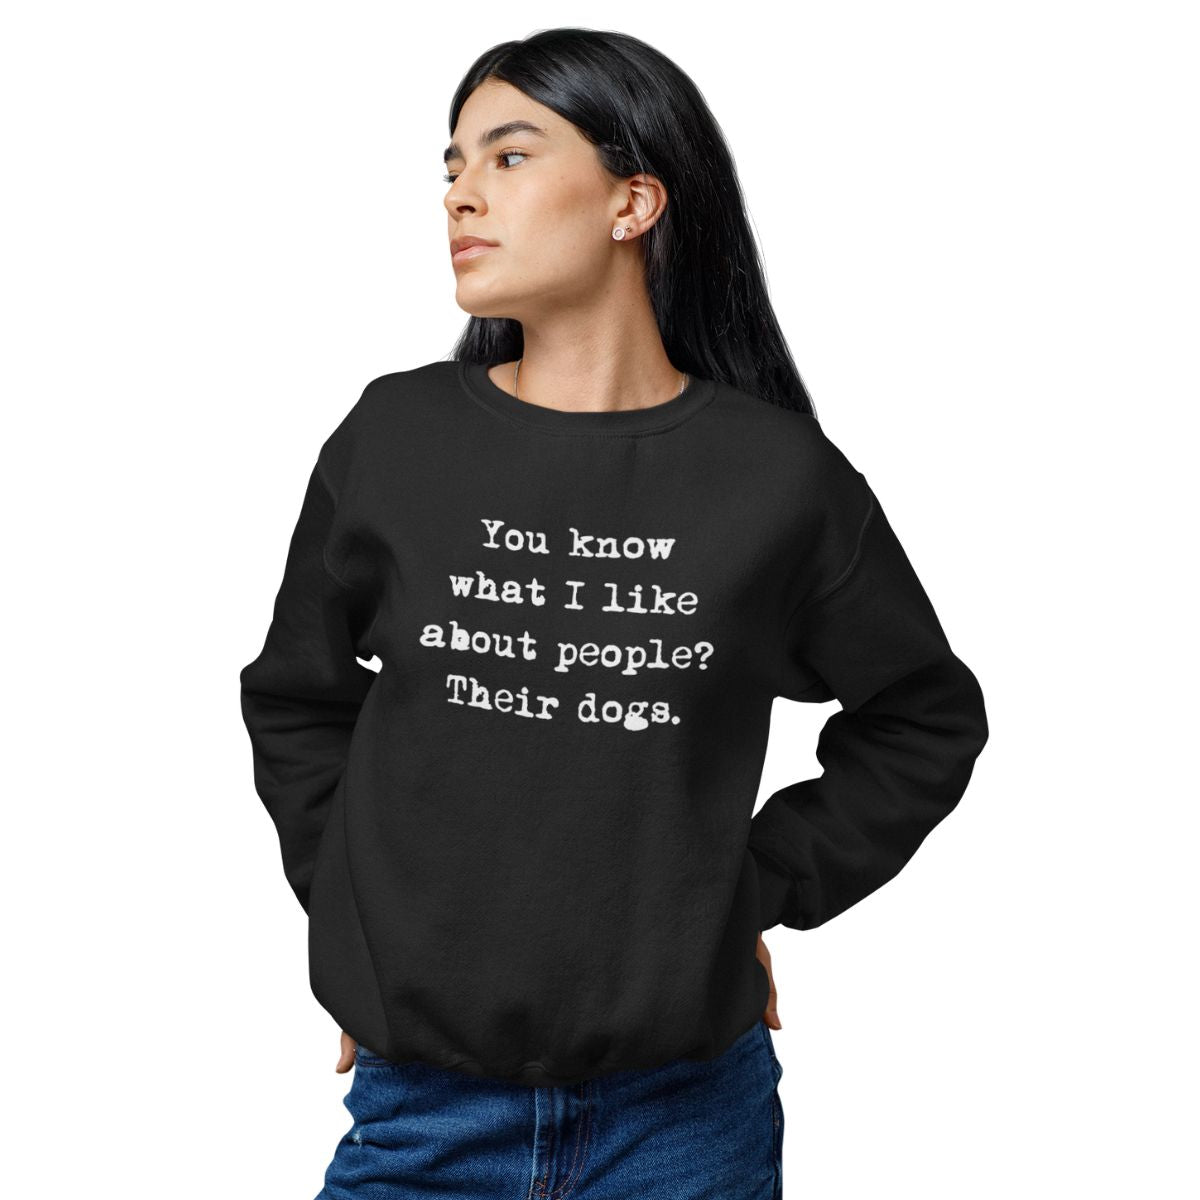 You Know What I Like About People Sweatshirt